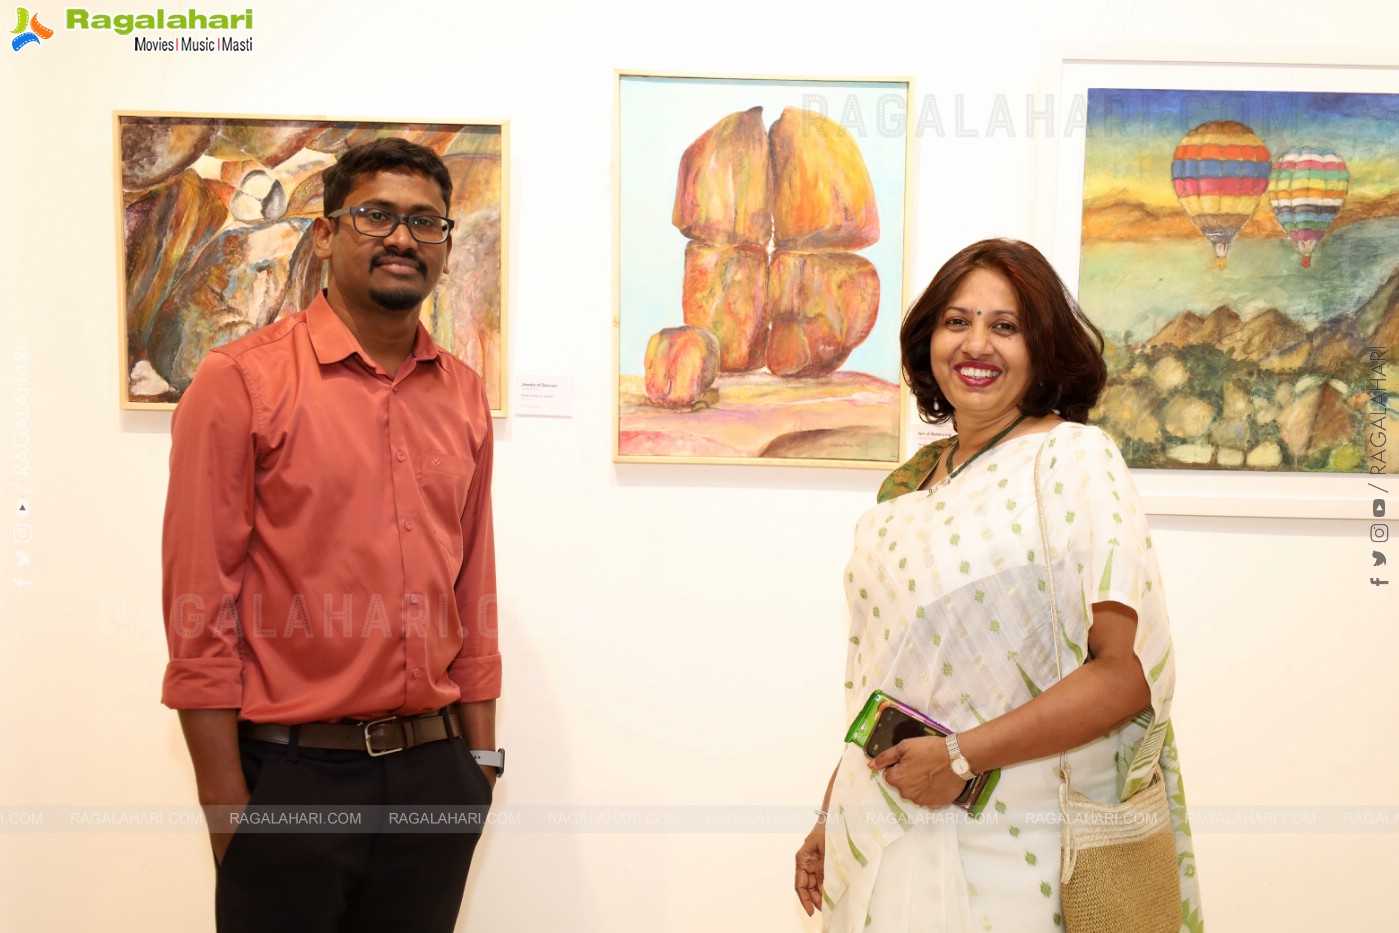 Sentinels of Hyderabad: An art show showcasing the boulders of Hyderabad and beyond